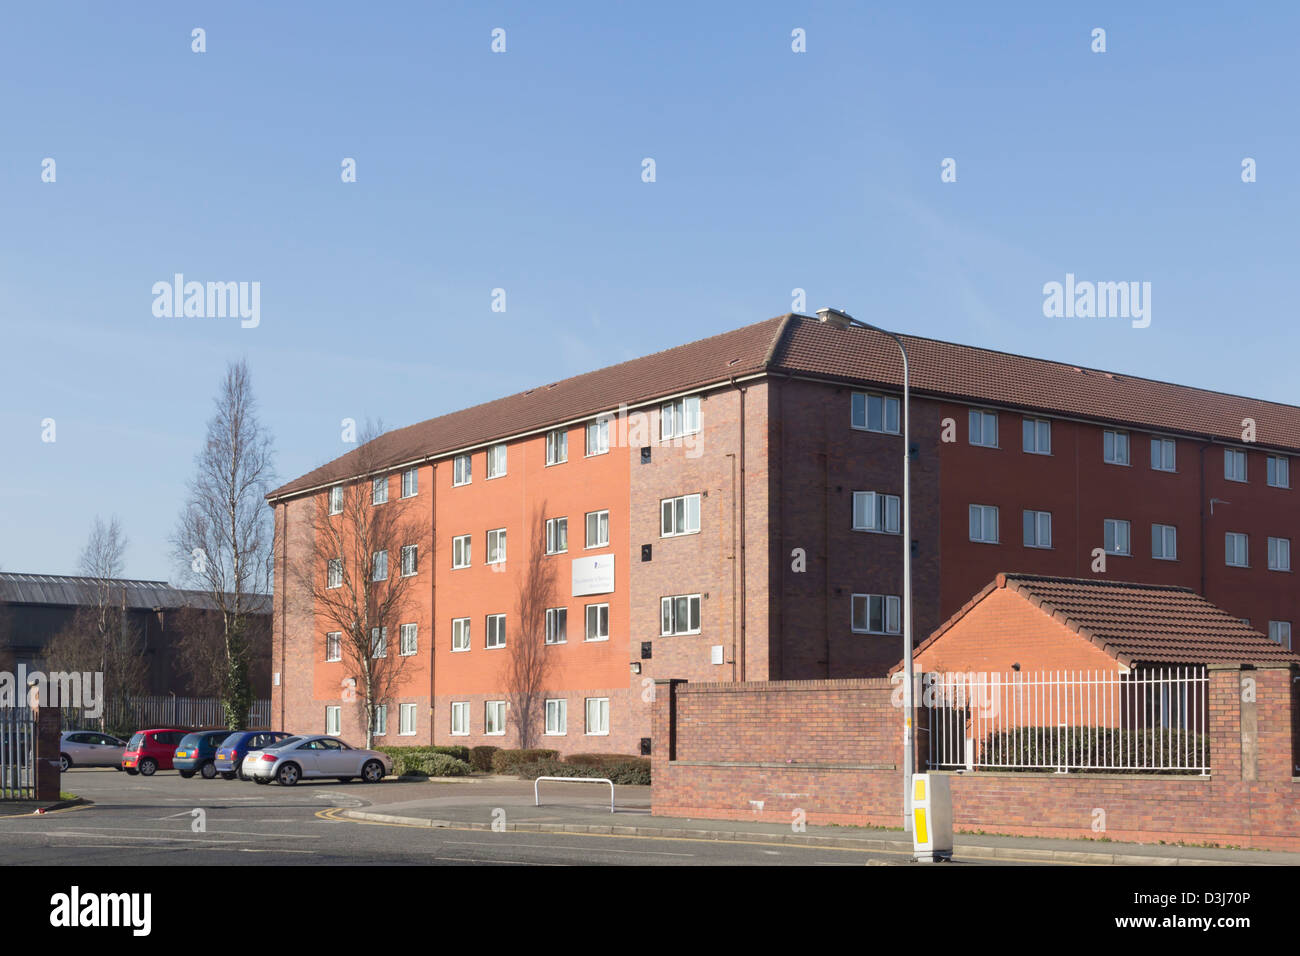 Orlando Village purpose built student accommodation for the University of Bolton. 64 flats totalling 363 single study/bedrooms. Stock Photo